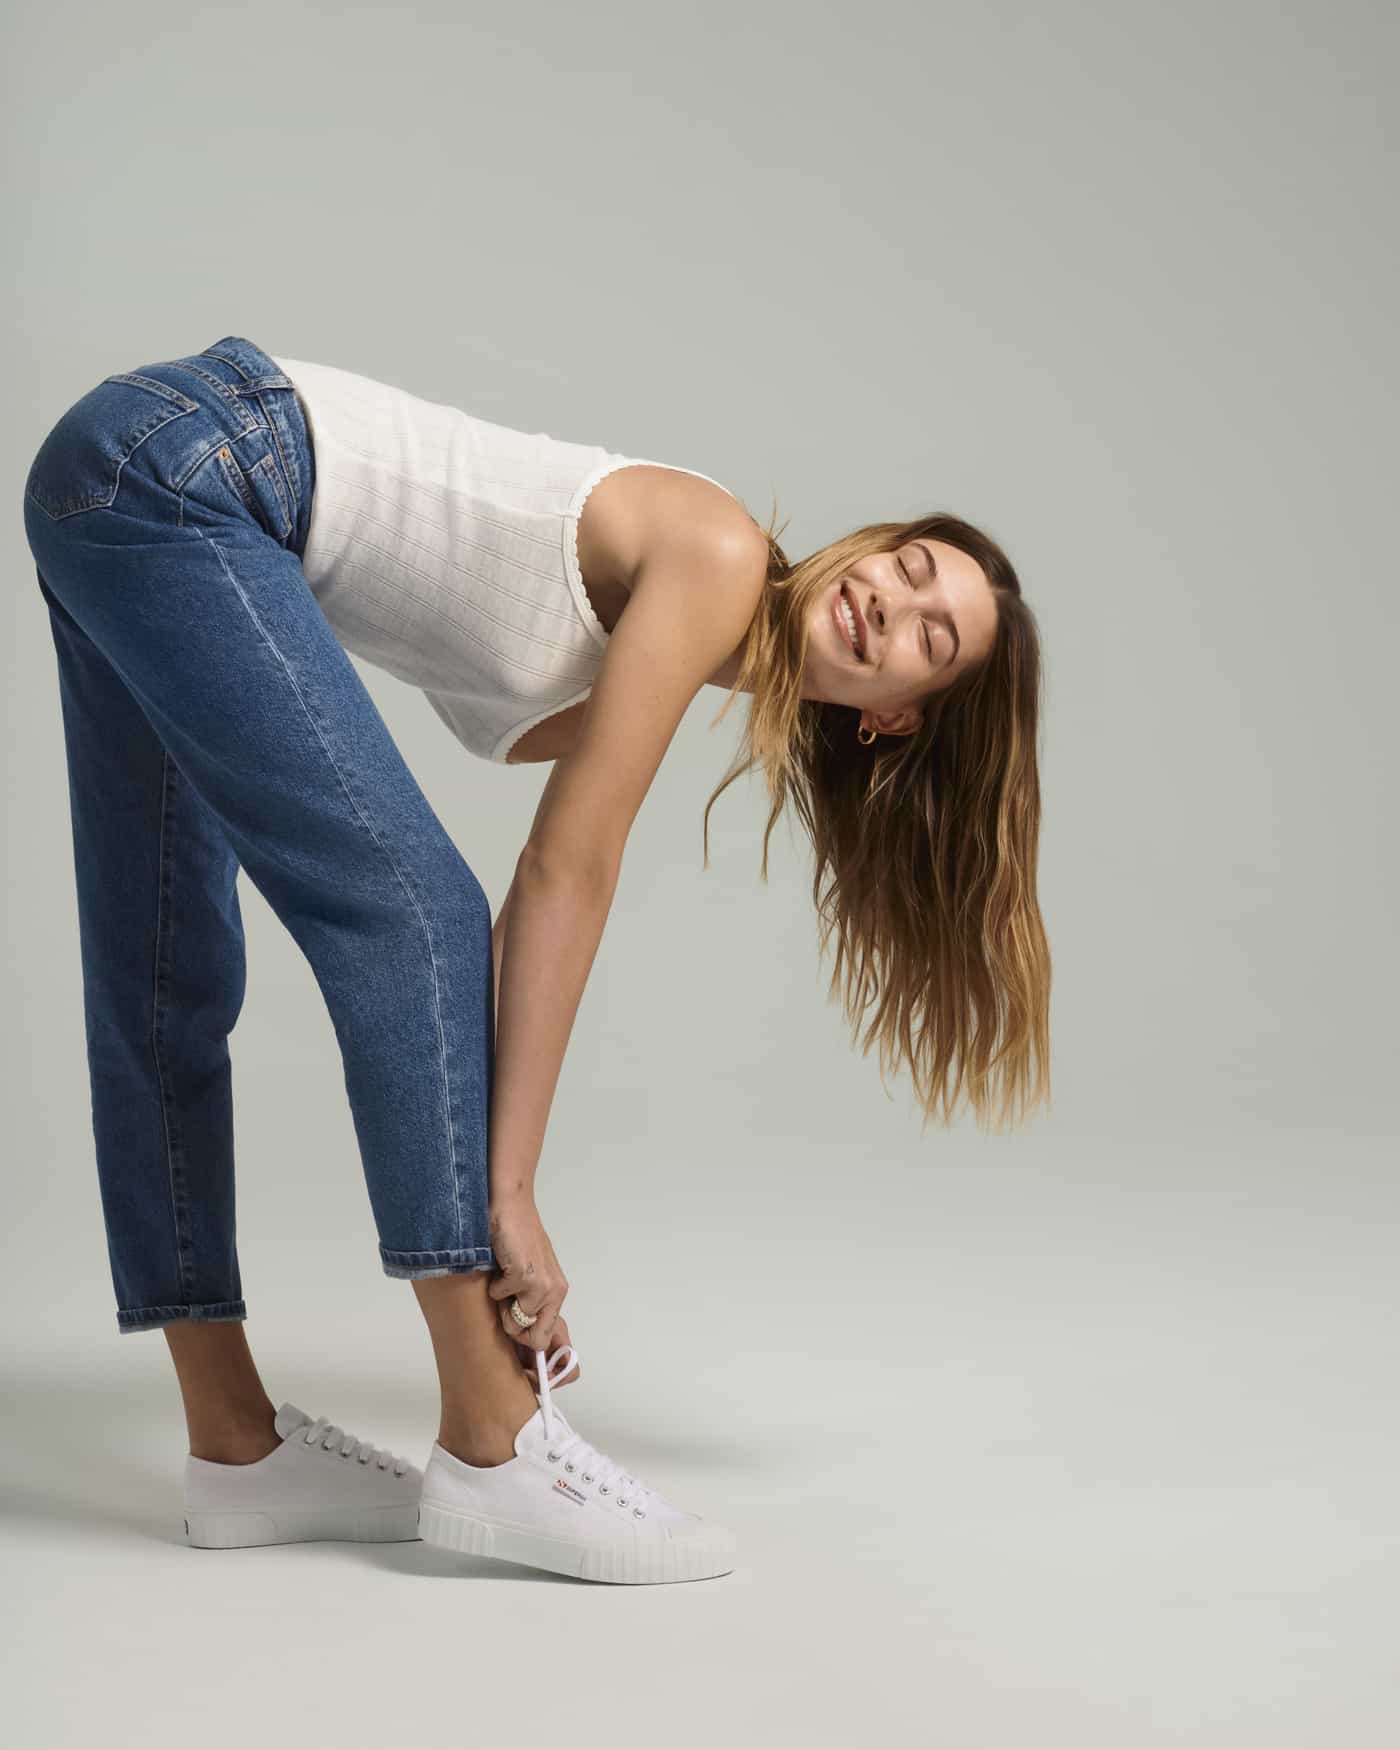 Supermodel Hailey Bieber Is The New Face Of Superga